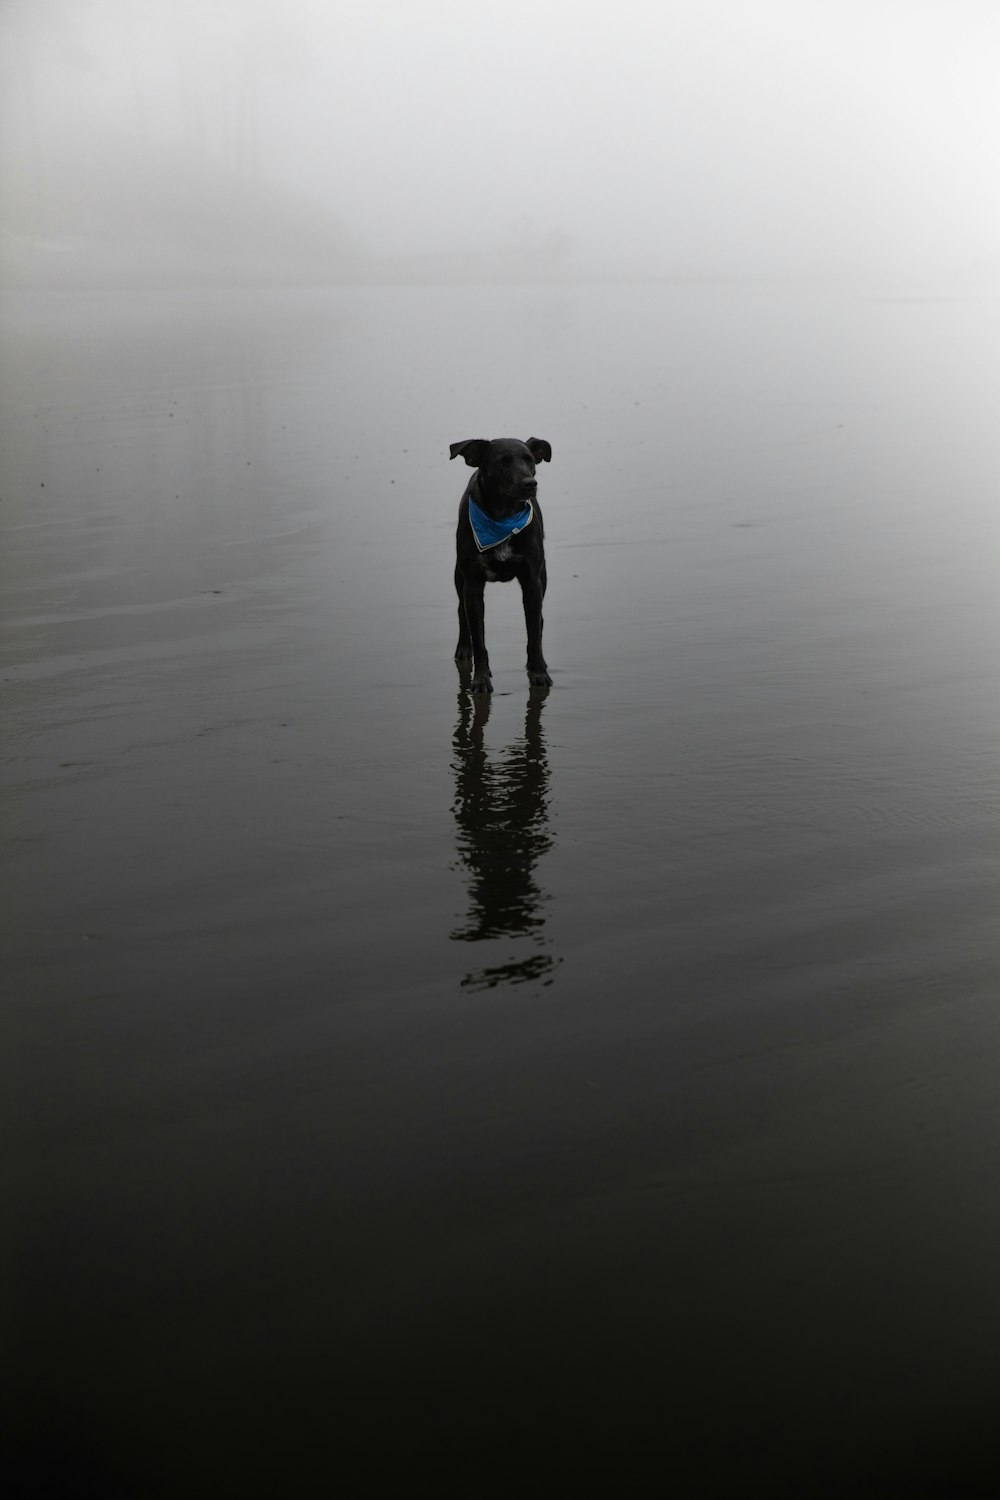 black dog standing on body of water